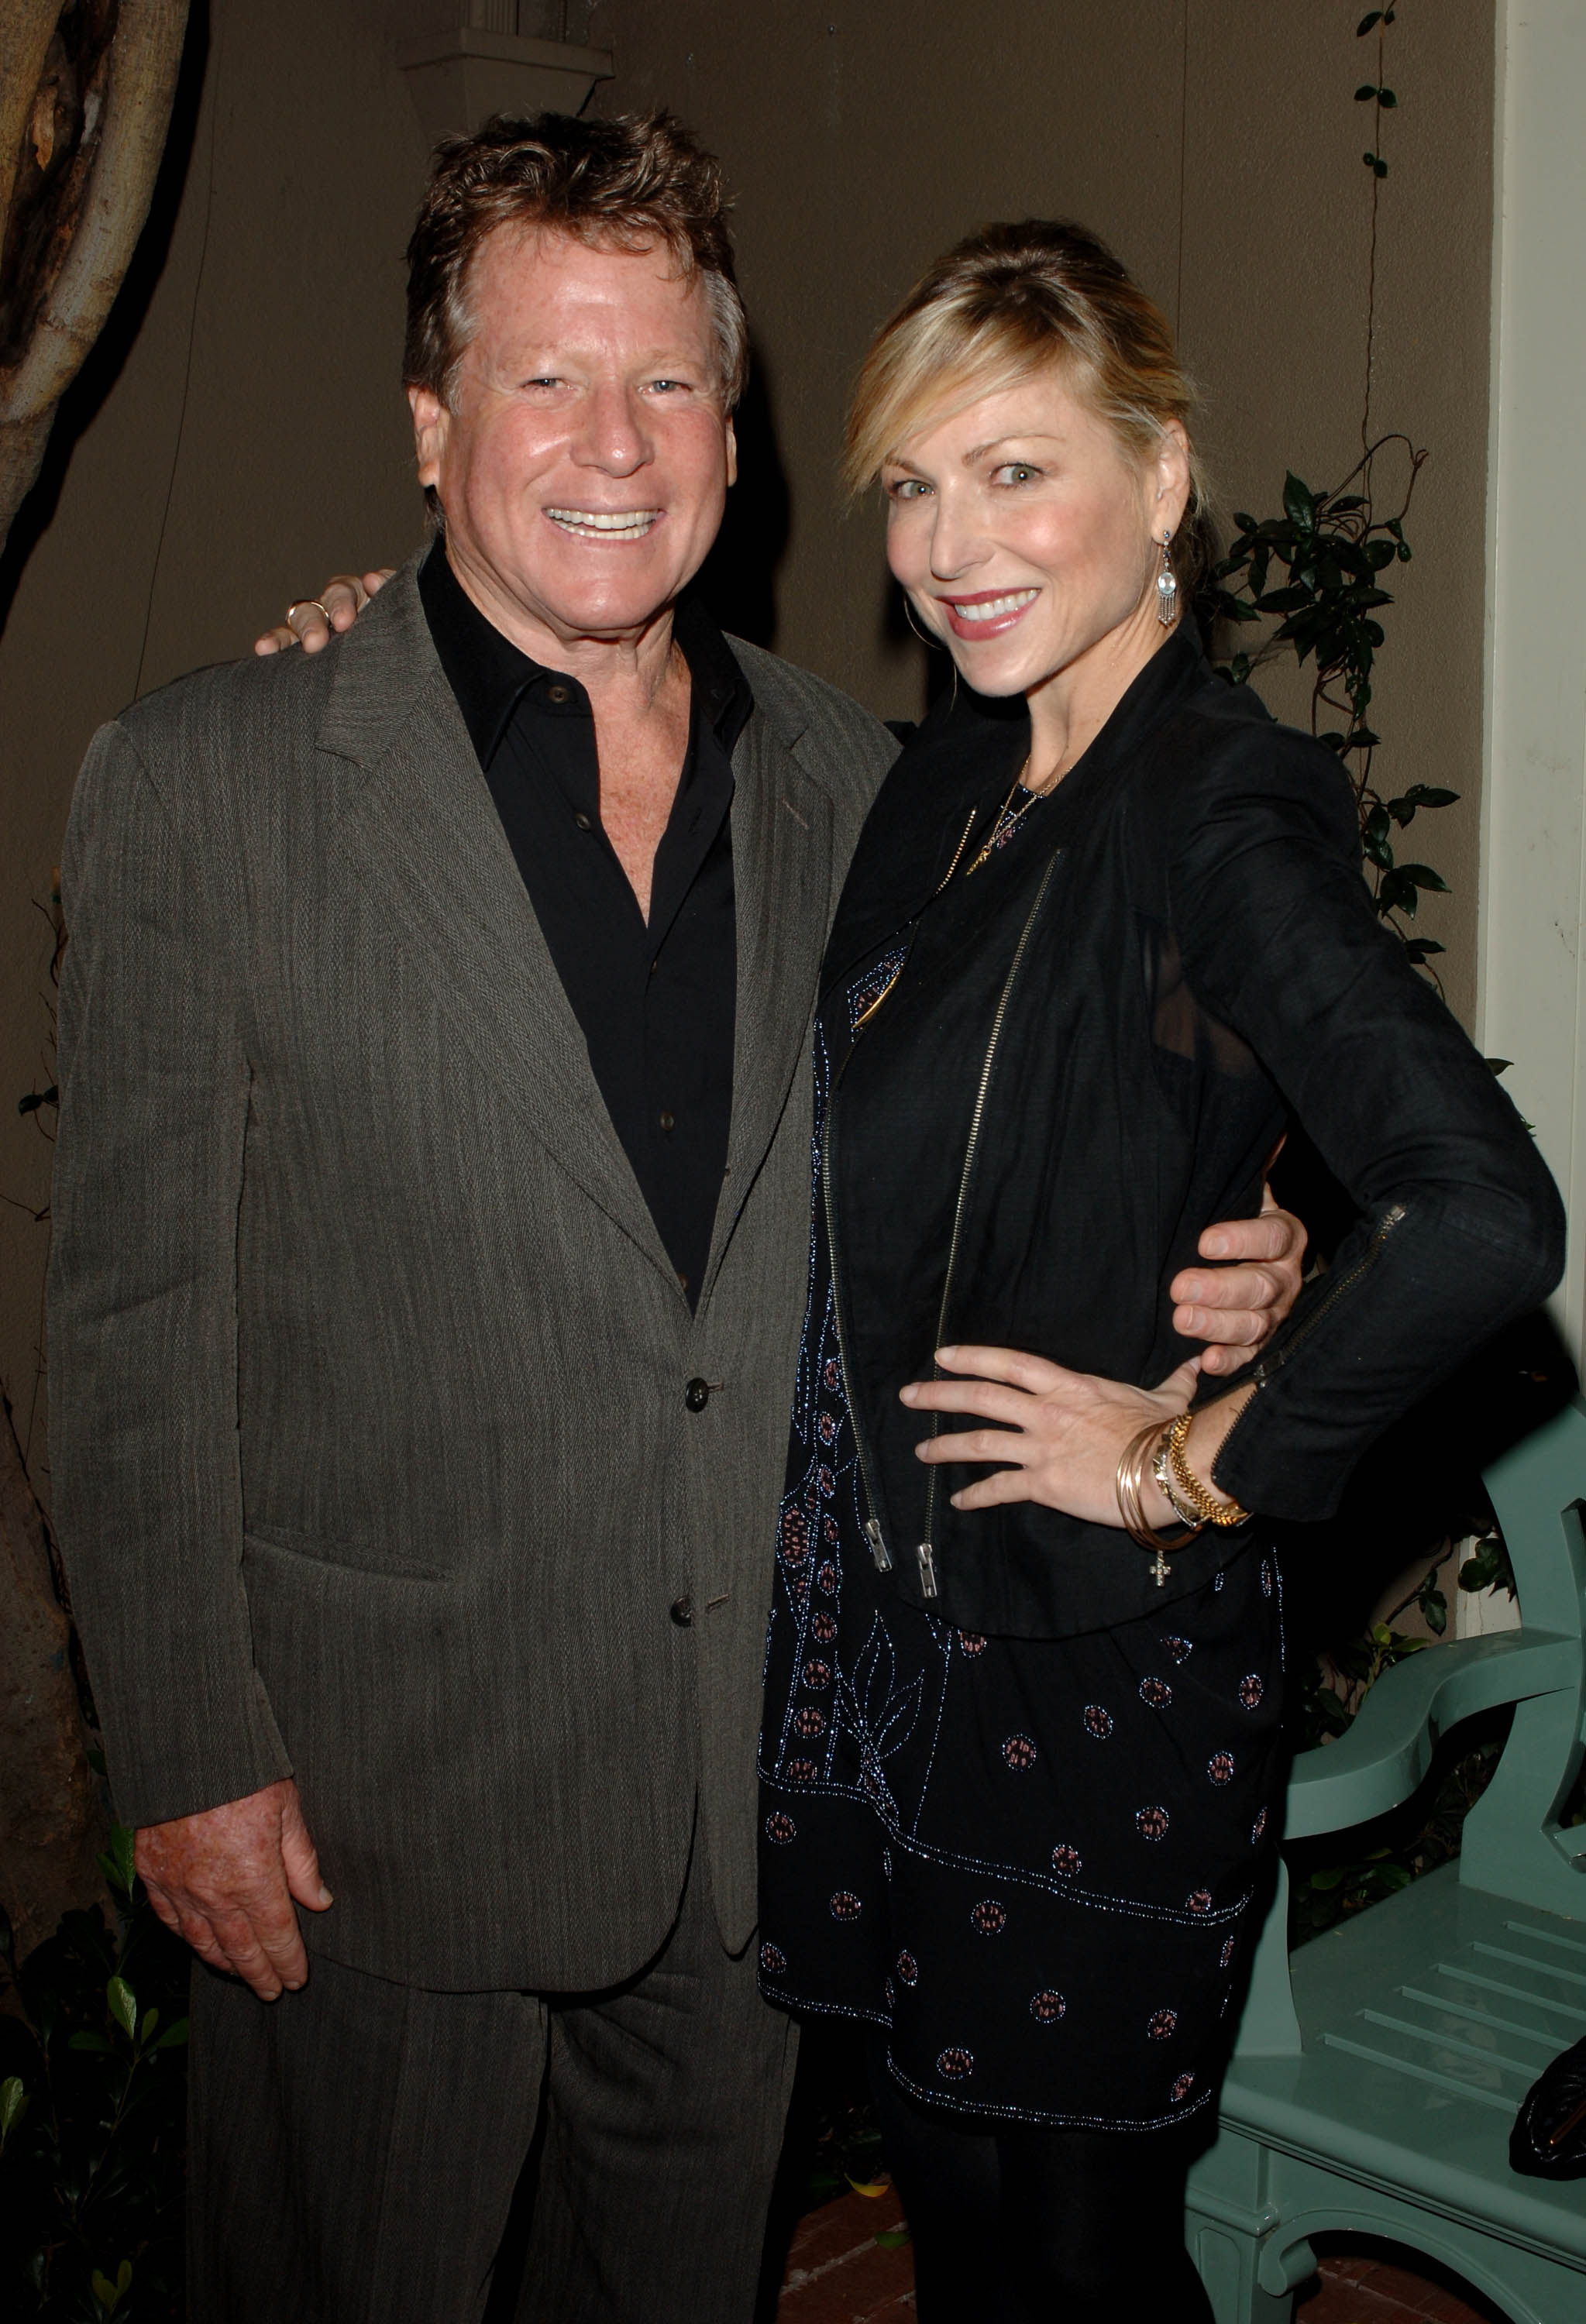 Ryan O'Neal and Tatum O'Neal at Raquel Welch "Beyond The Cleavage" Book Party on May 6, 2010 in West Hollywood, California | Source: Getty Images